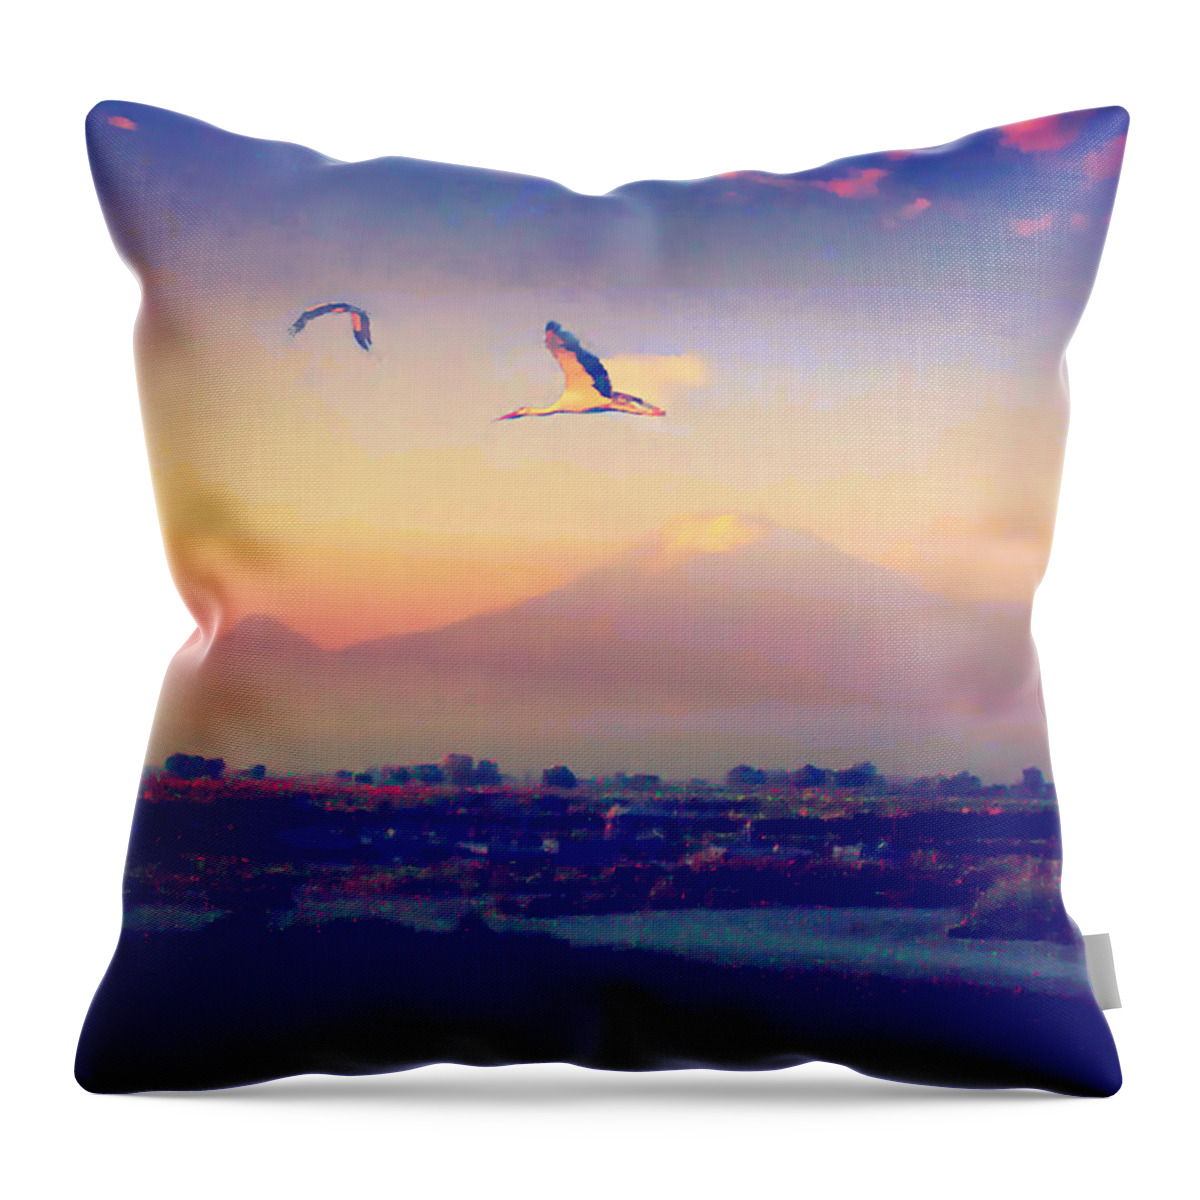 Mt. Ararat Throw Pillow featuring the photograph Dawn with Storks and Ararat from Night Train to Yerevan by Anastasia Savage Ealy